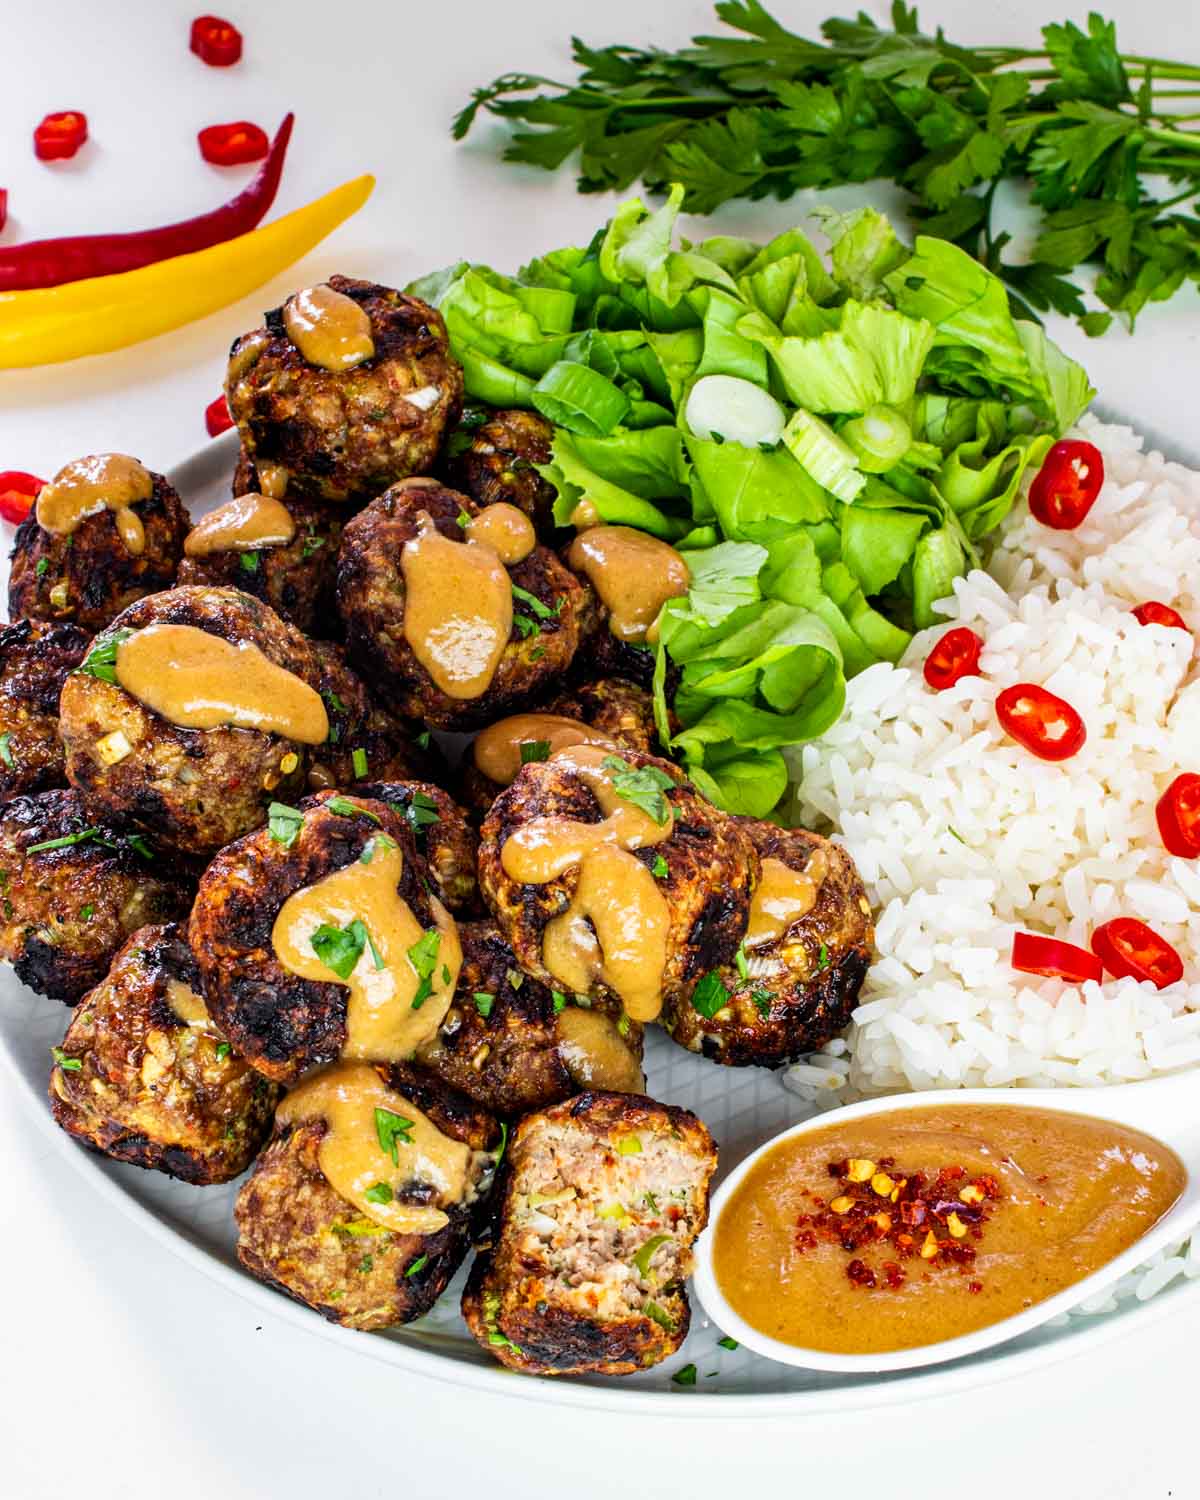 vietnamese meatballs with peanut sauce next to a bed of rice and garnished with thai red peppers.